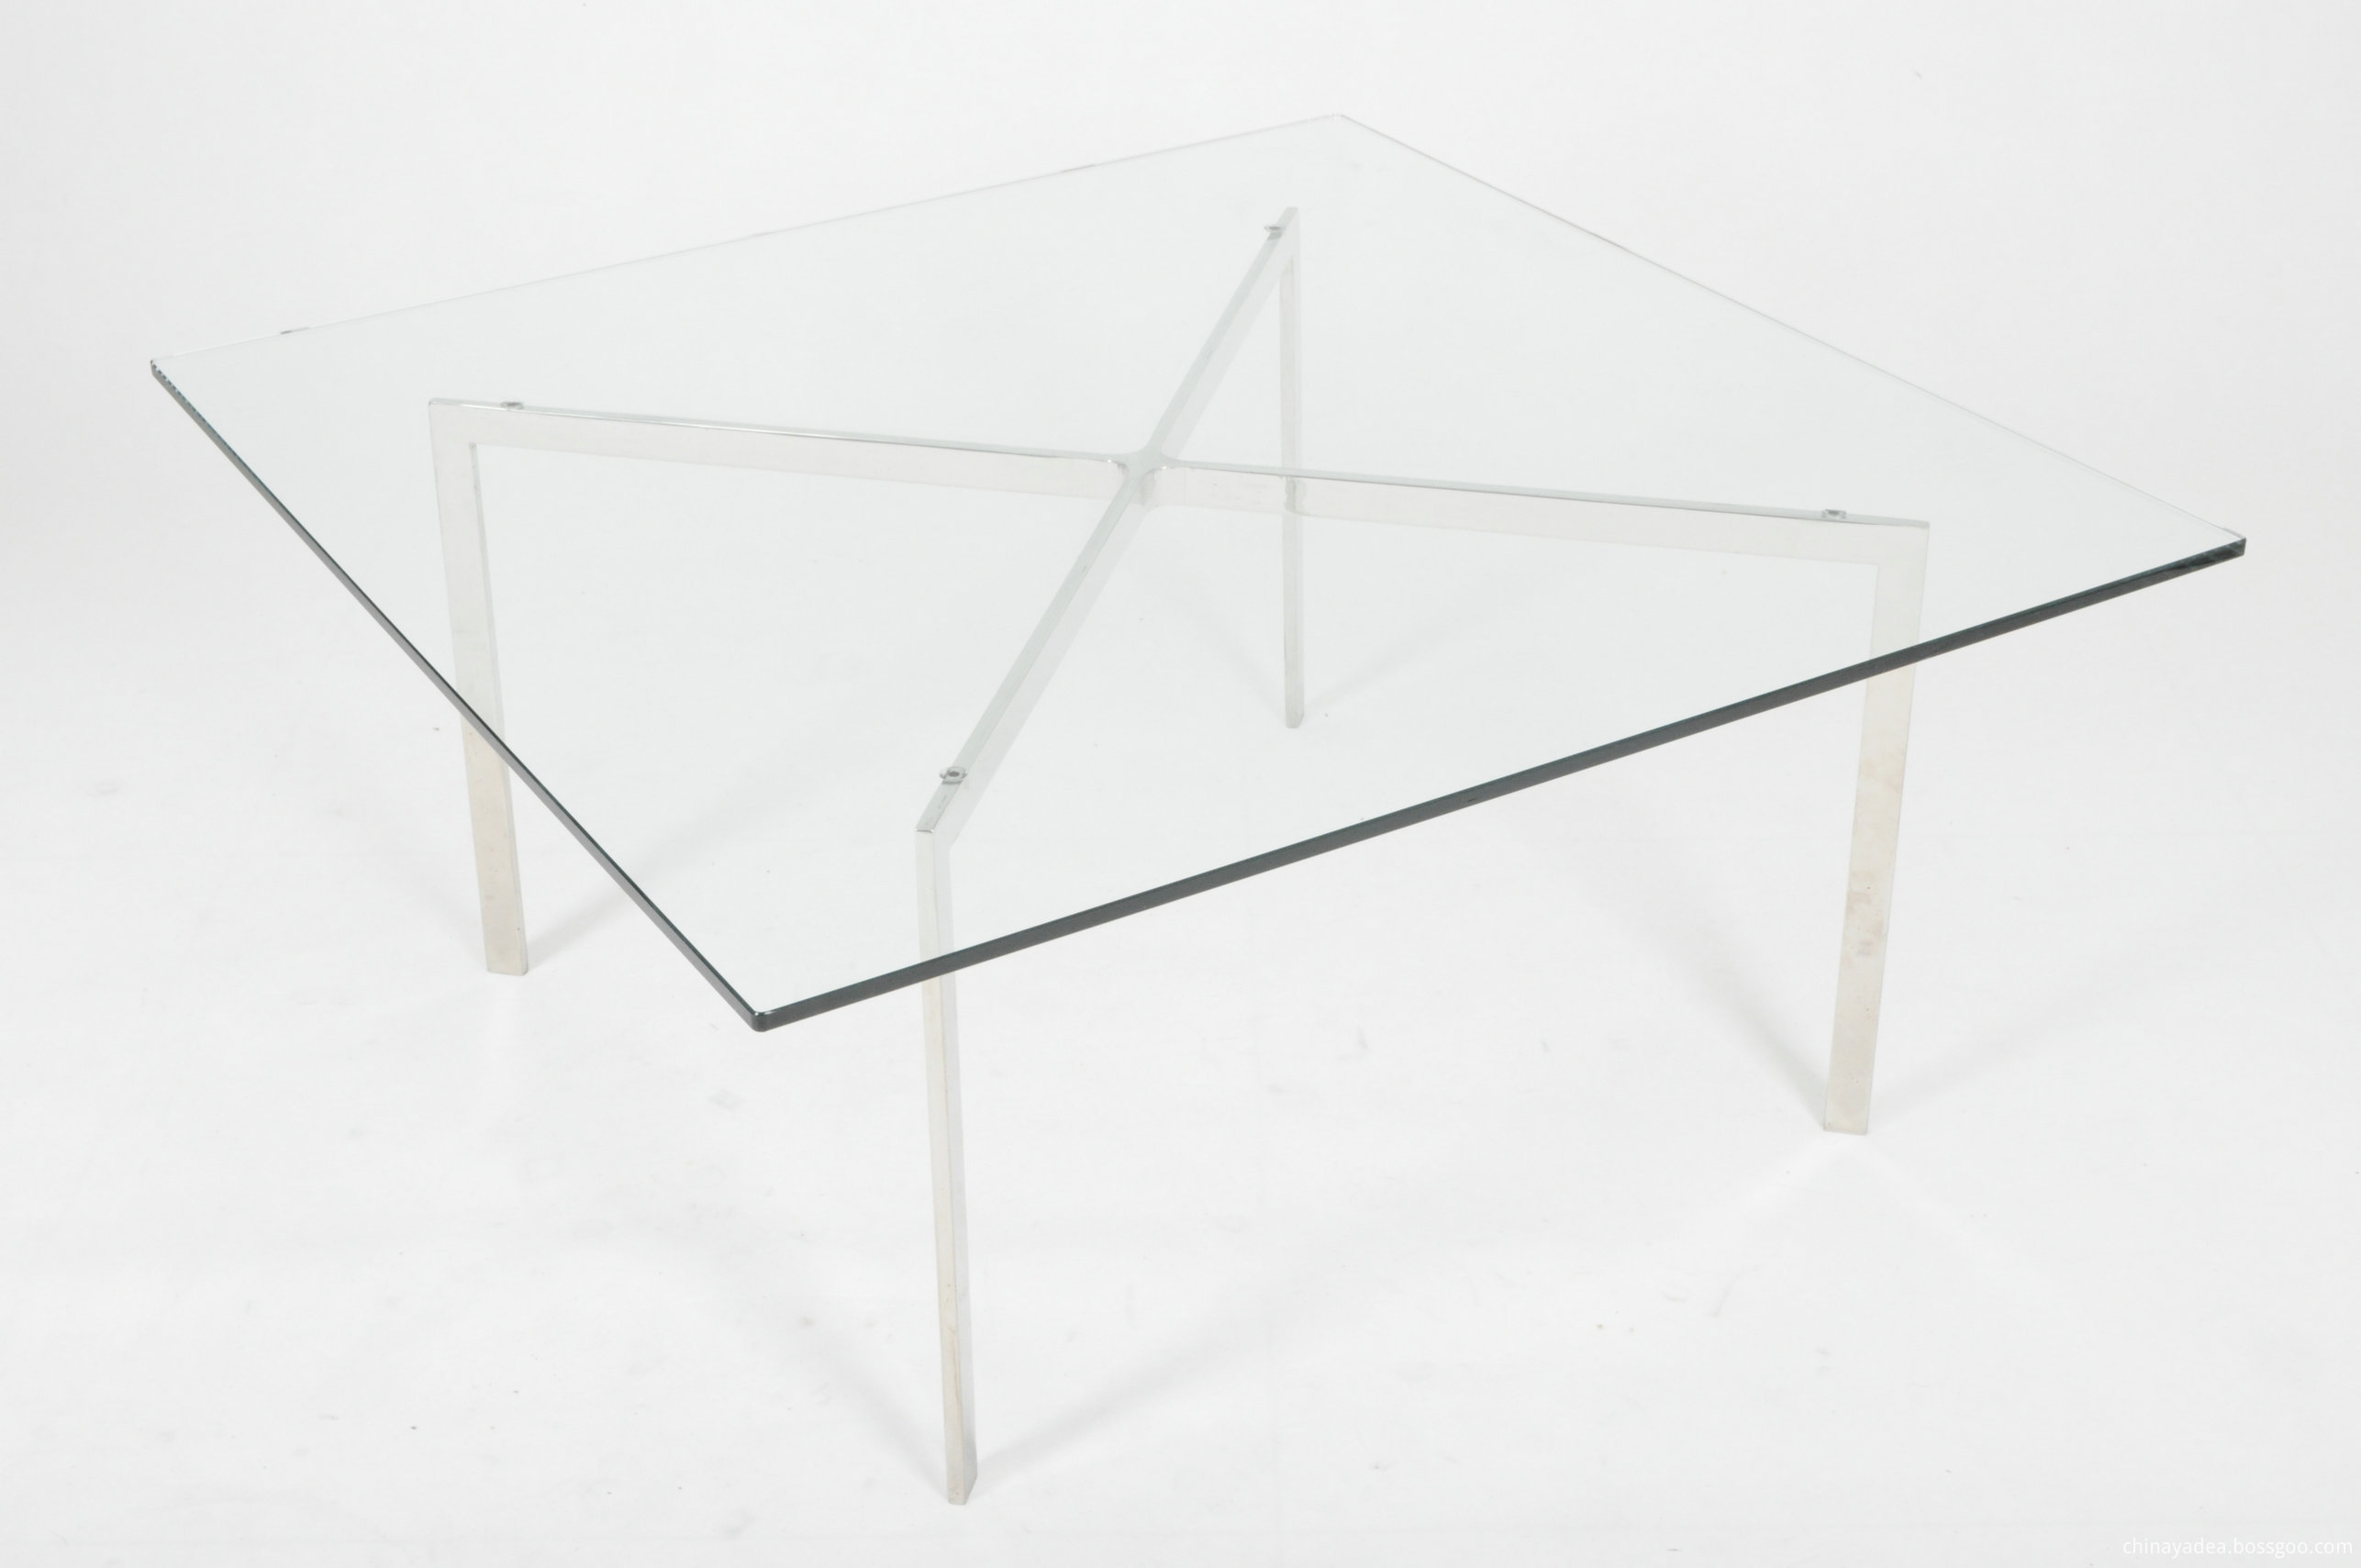 Ludwing Mies van der Rohe coffee table